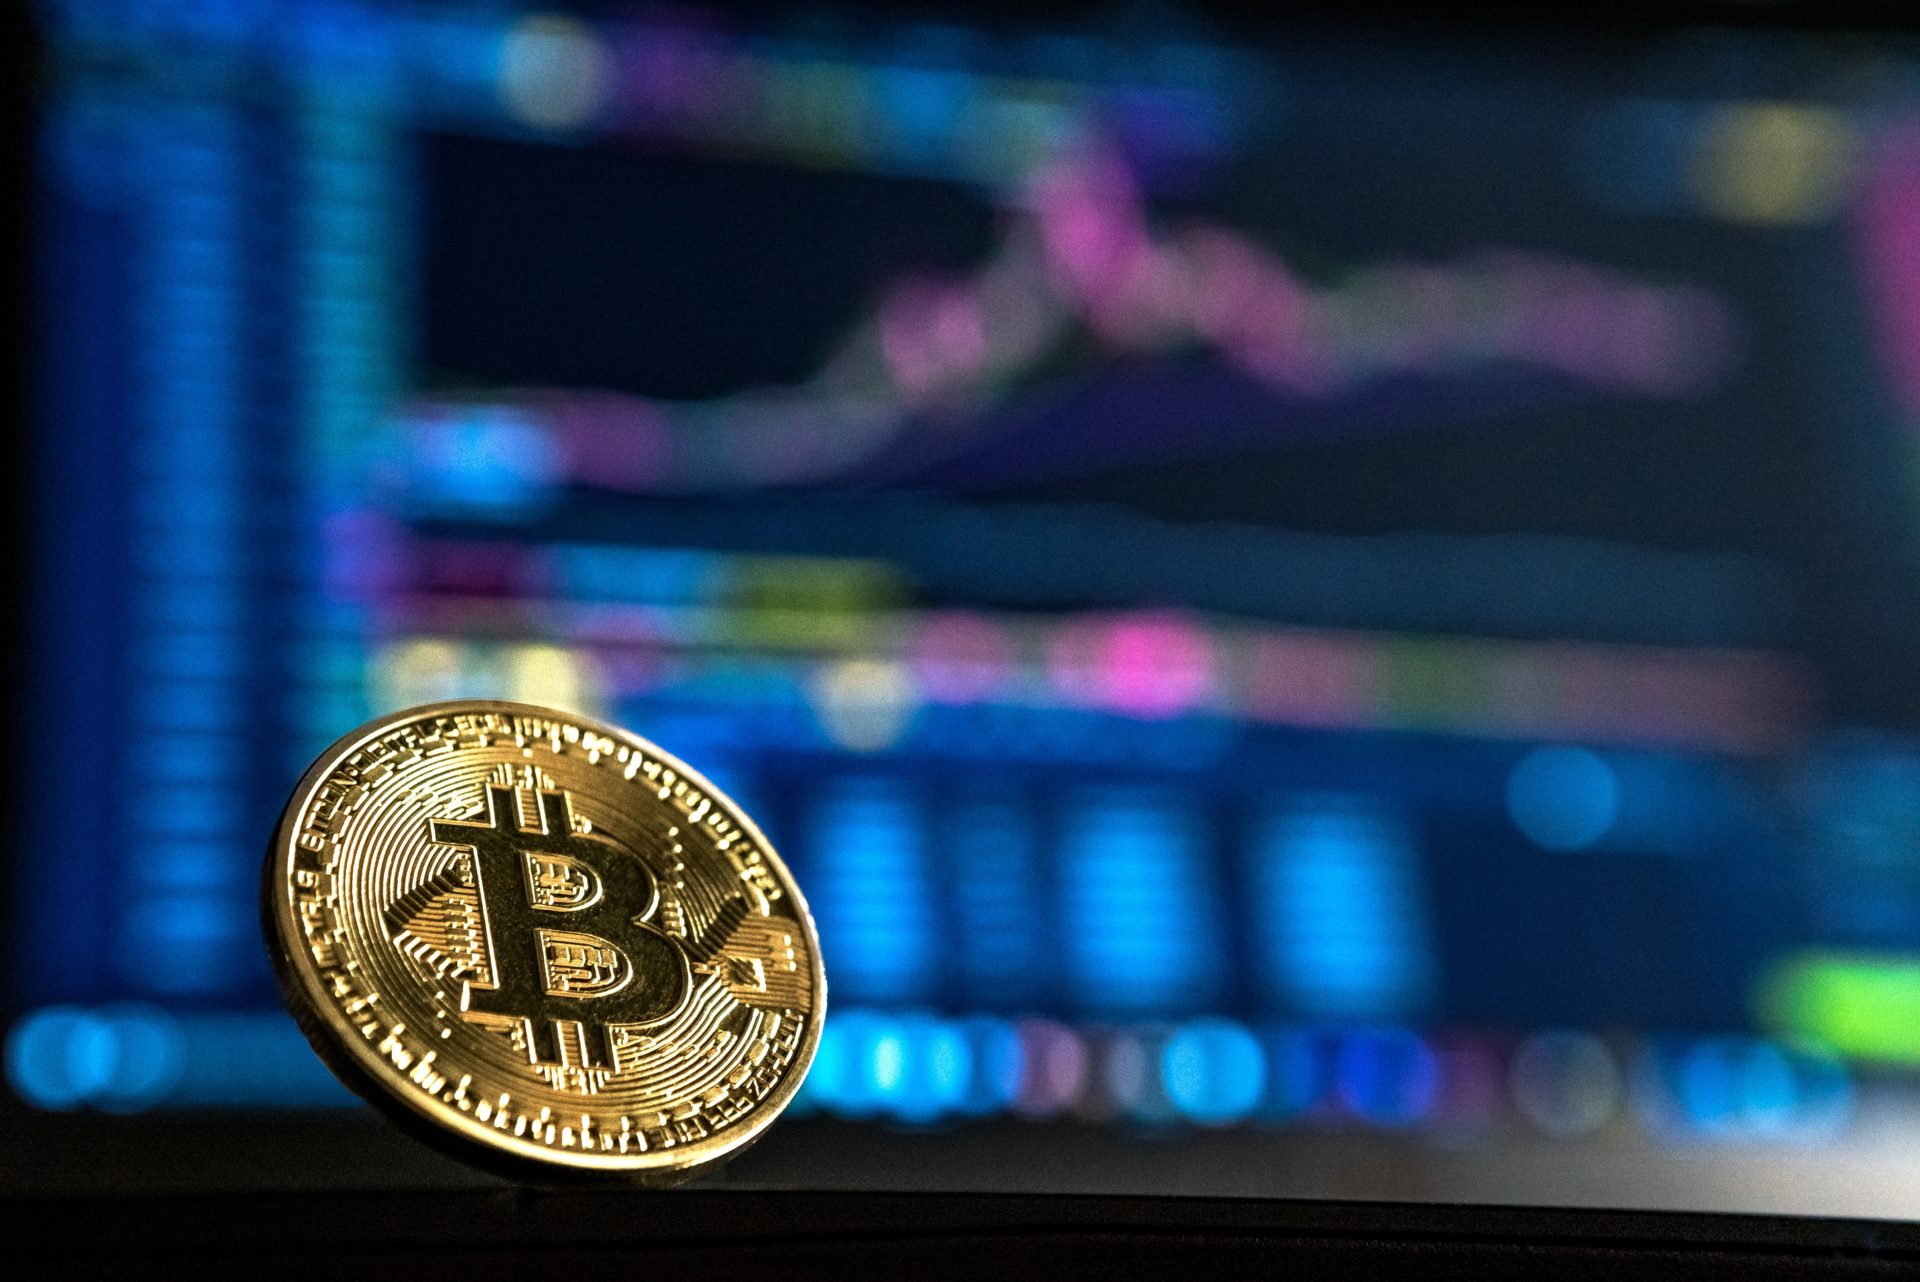 Bitcoin (BTC) Falls To $6900 In Market Drop, Analysts Call For Lower Prices